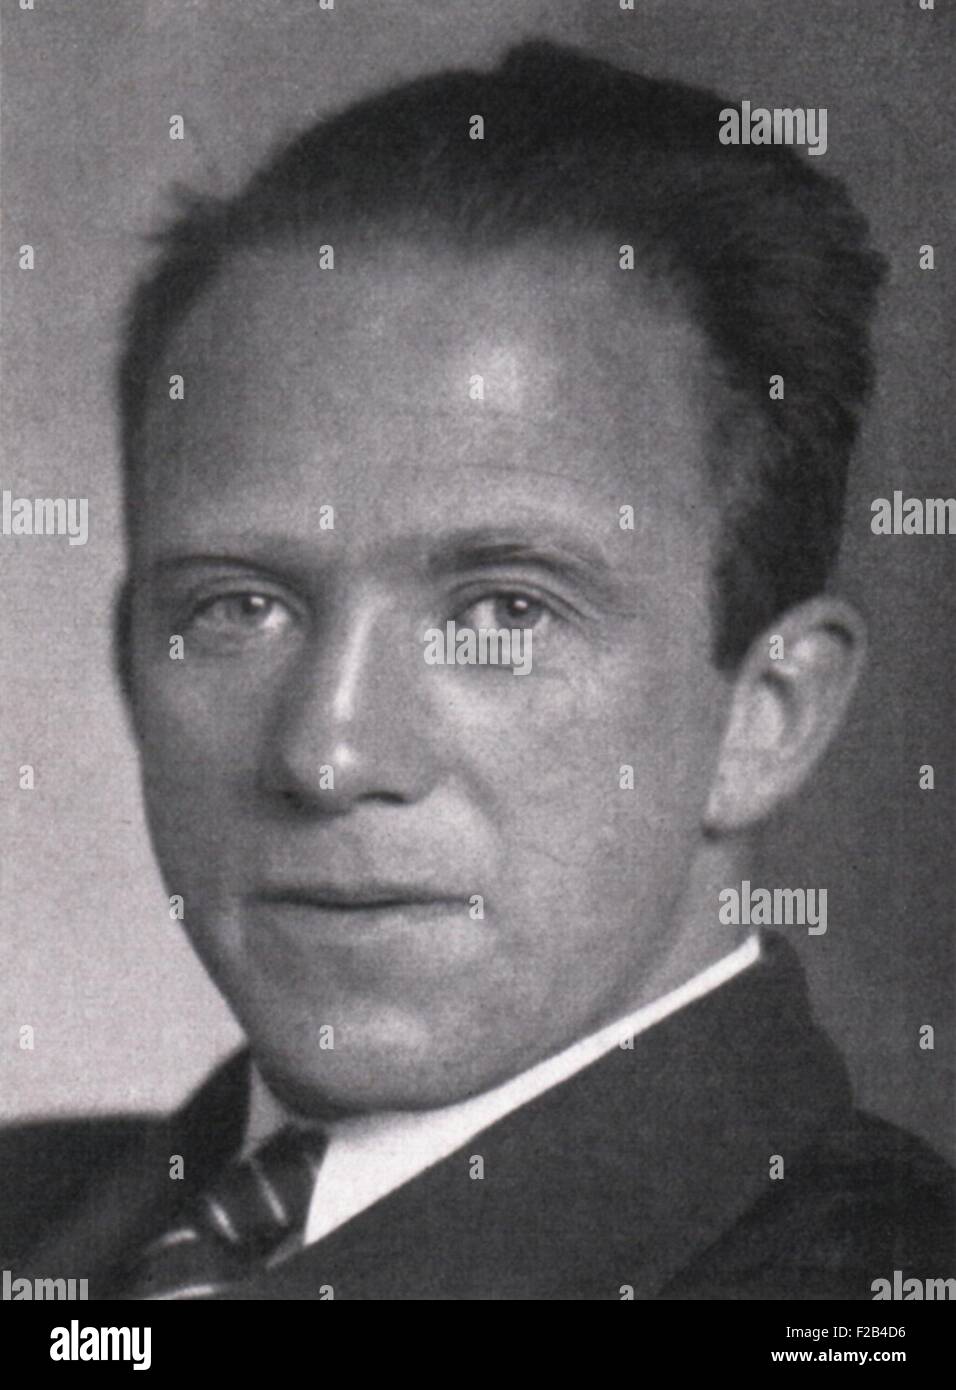 Werner Heisenberg, theoretical physicist, was awarded the 1932 Nobel Prize. He contributed to the development of quantum mechanics and the principle of uncertainty. Photo by Max Lohrich. - (BSLOC 2015 1 76) Stock Photo